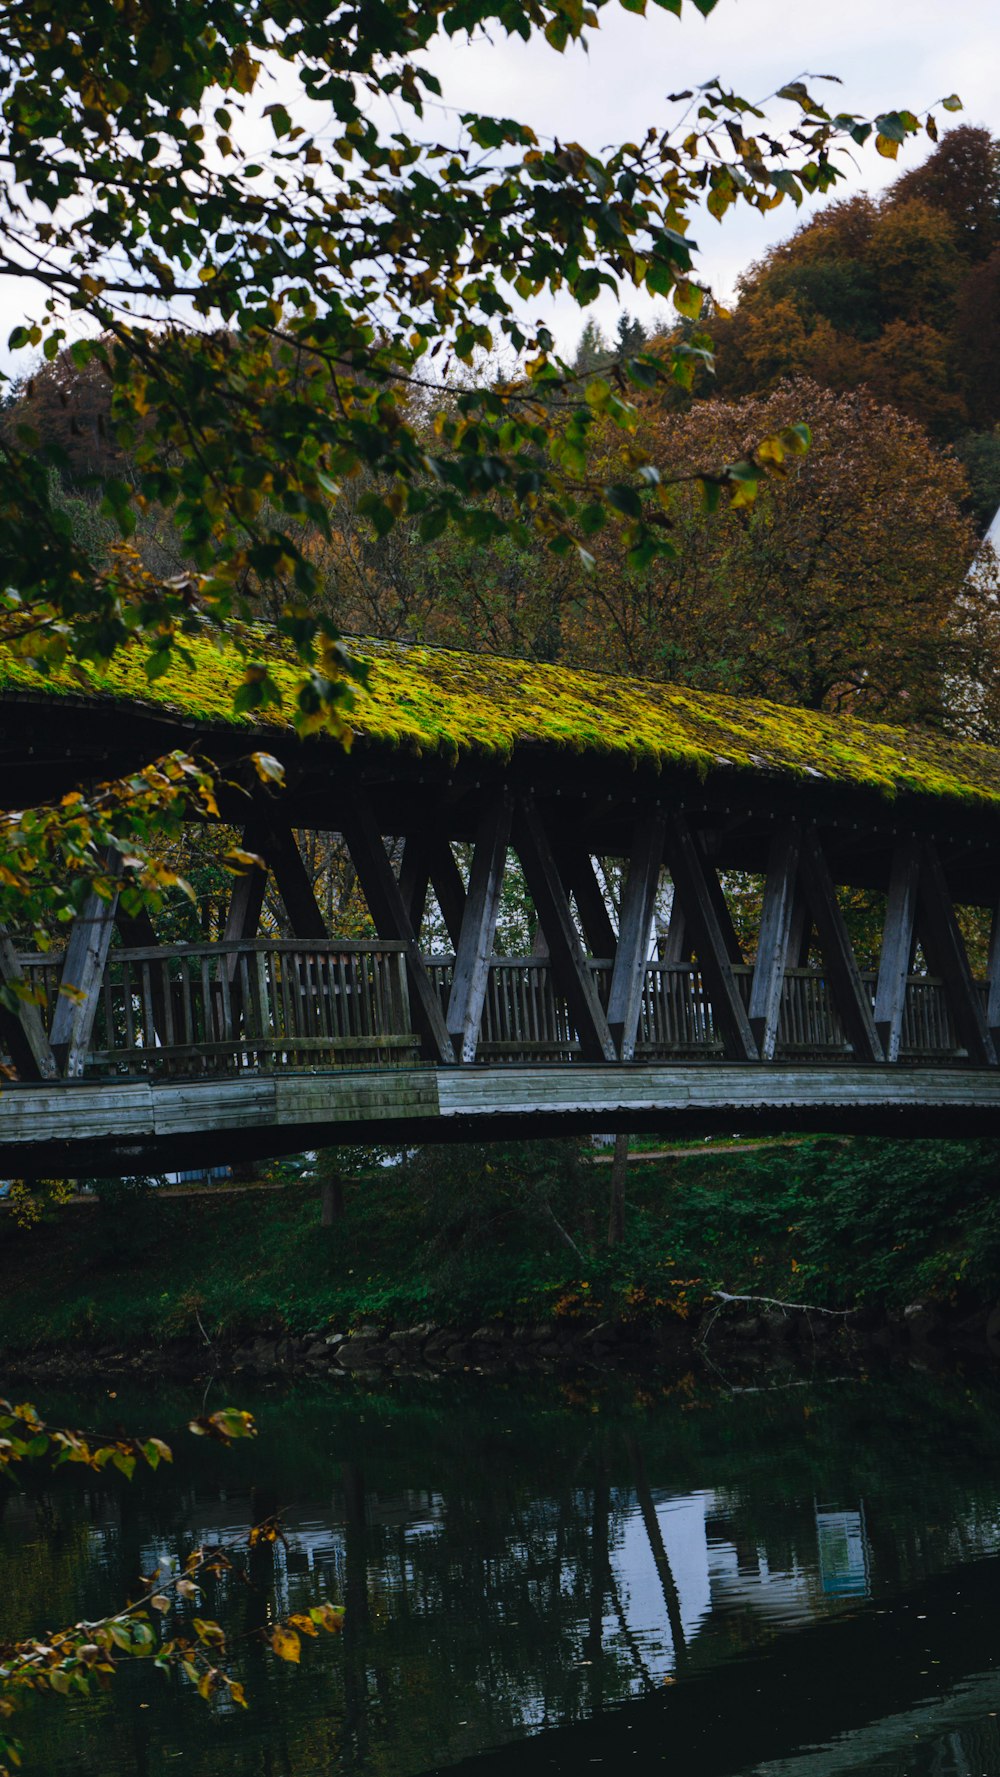 a bridge with a green roof over a body of water